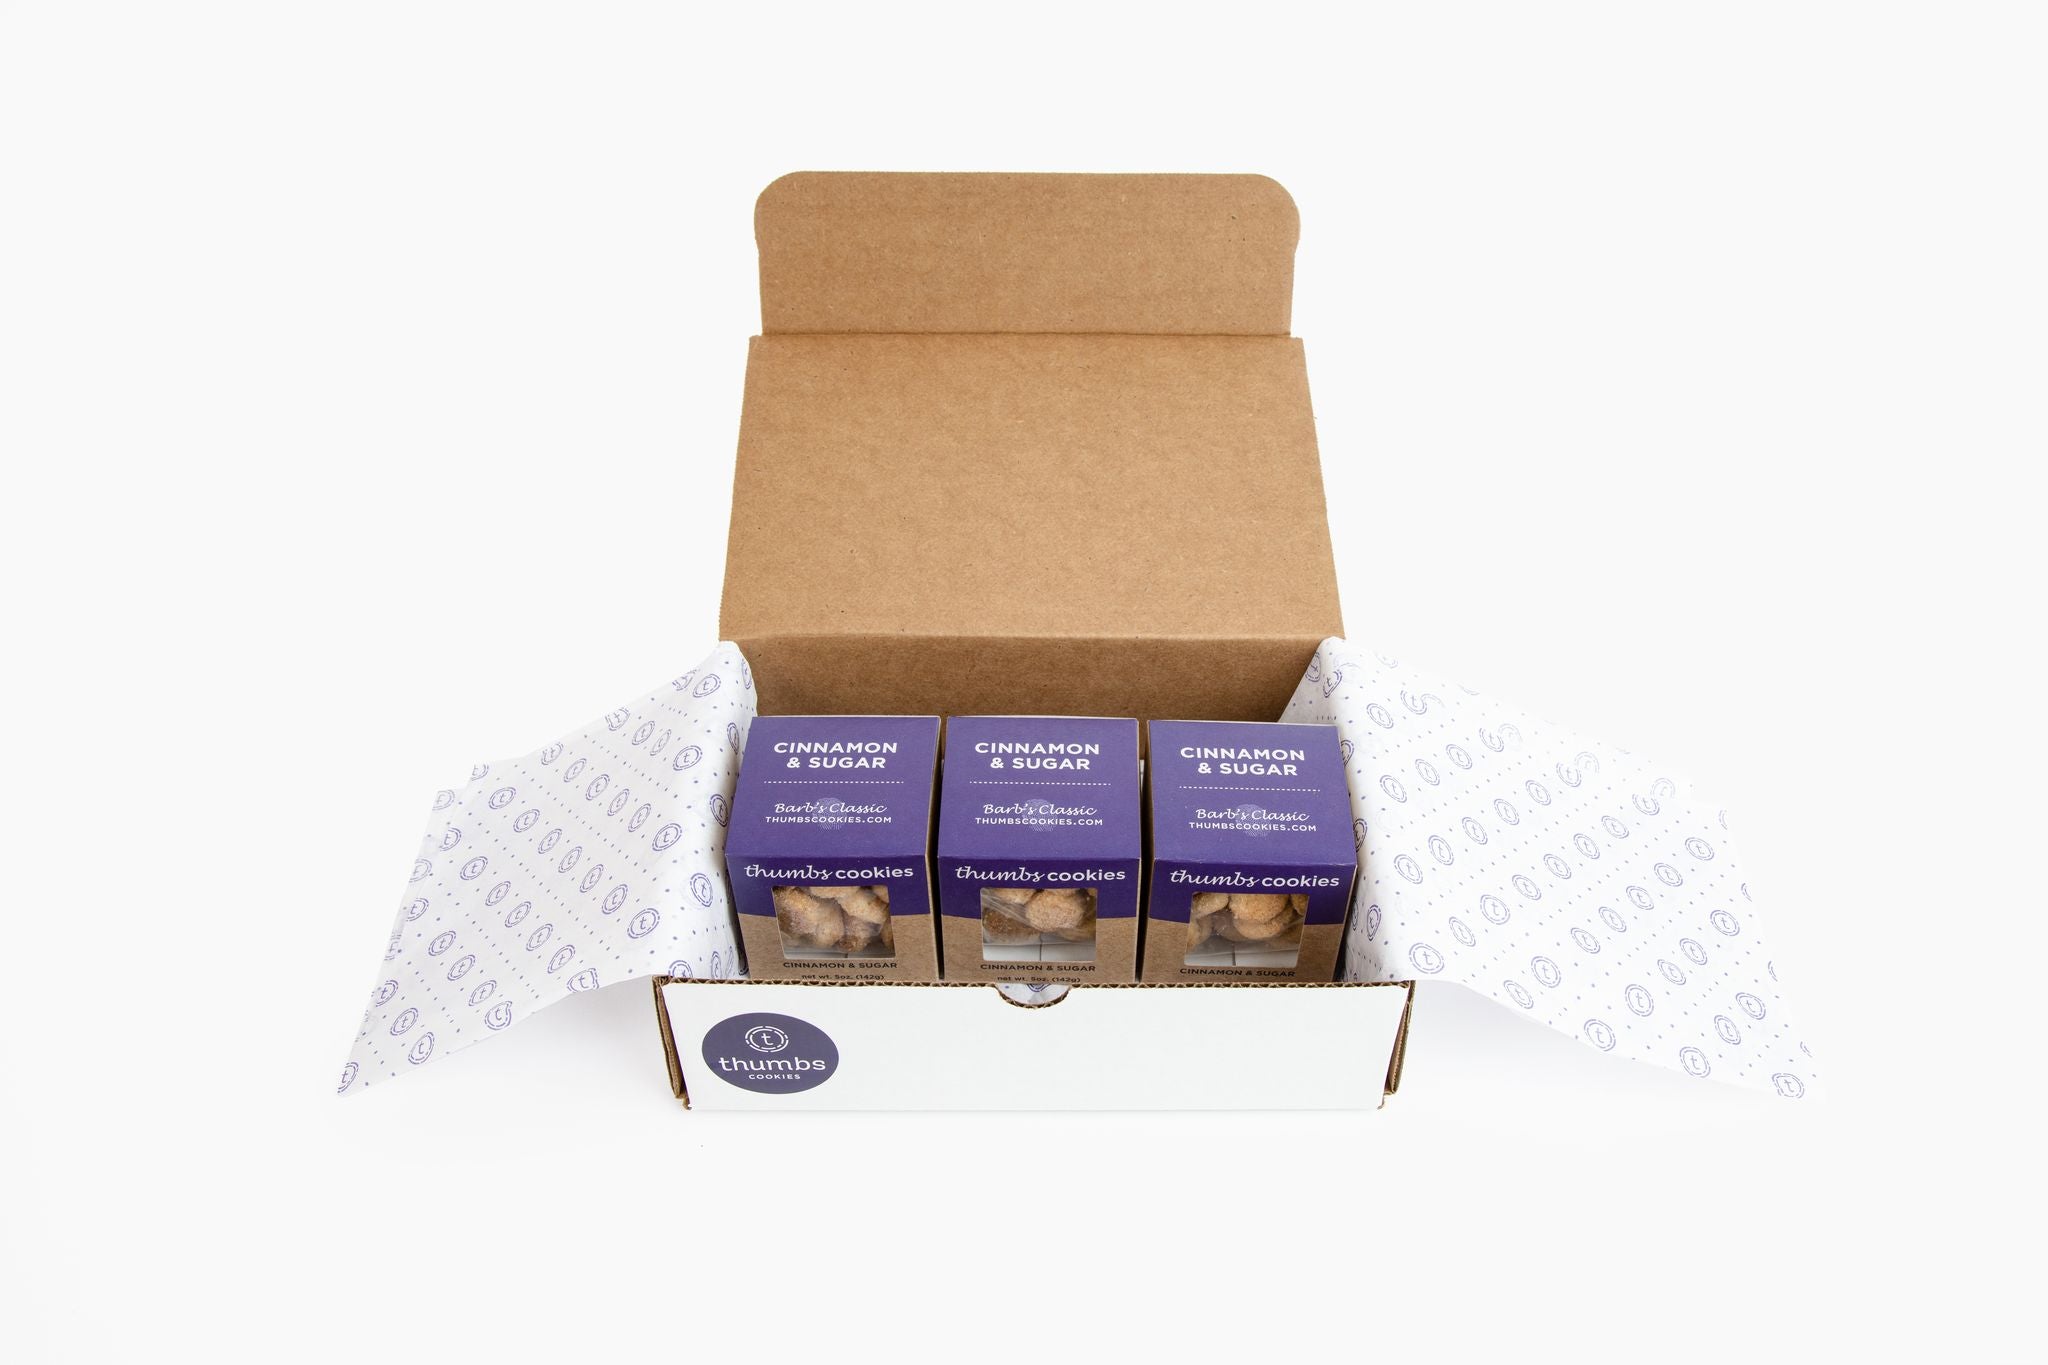 Thumbs Cookies Monthly Subscription Box